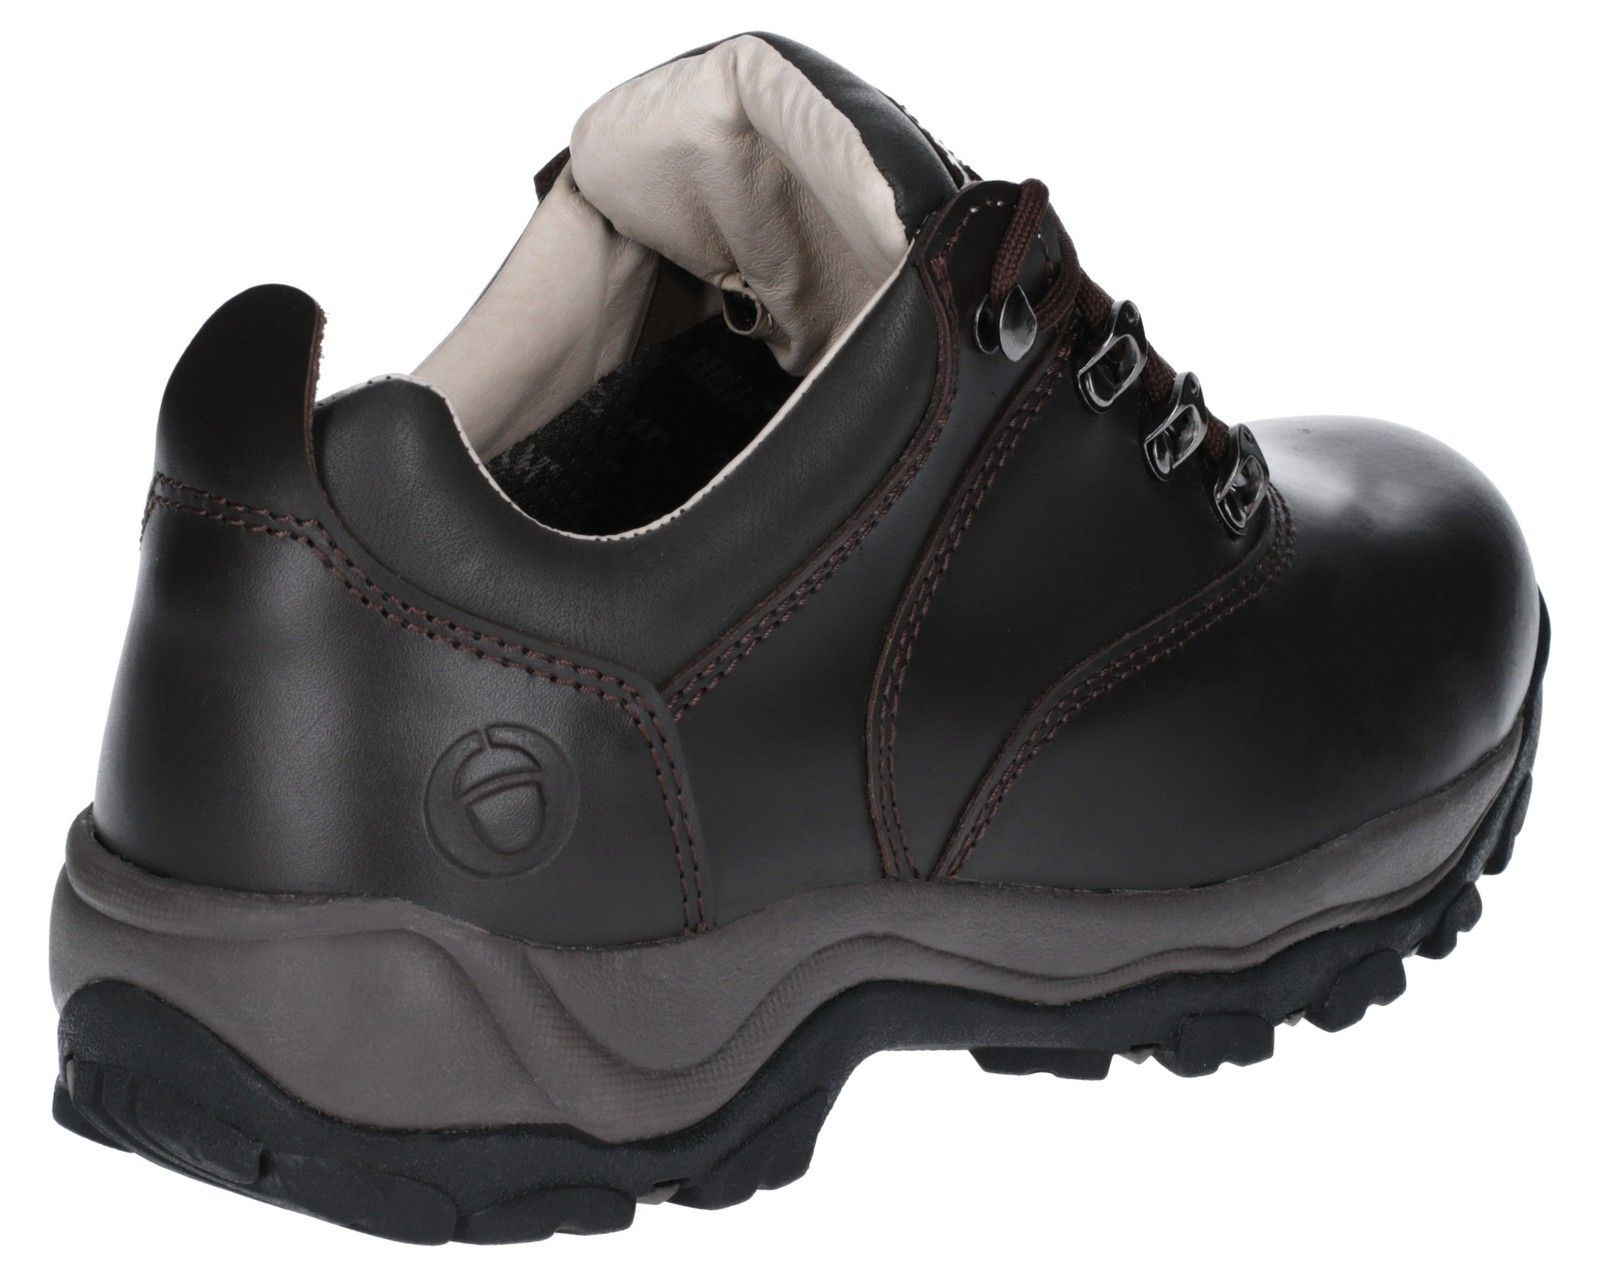 A classic leather trail and hill walking shoe from Cotswold with waterproof lining - a sure safe choice for the Great British Weather and a countryside hike.Crazy horse full grain leather upper. 
Waterproof breathable membrane. 
Dual padded leather lined collar. 
Metal lace rings with speed lacing. 
Cushioning EVA/Rubber sole.